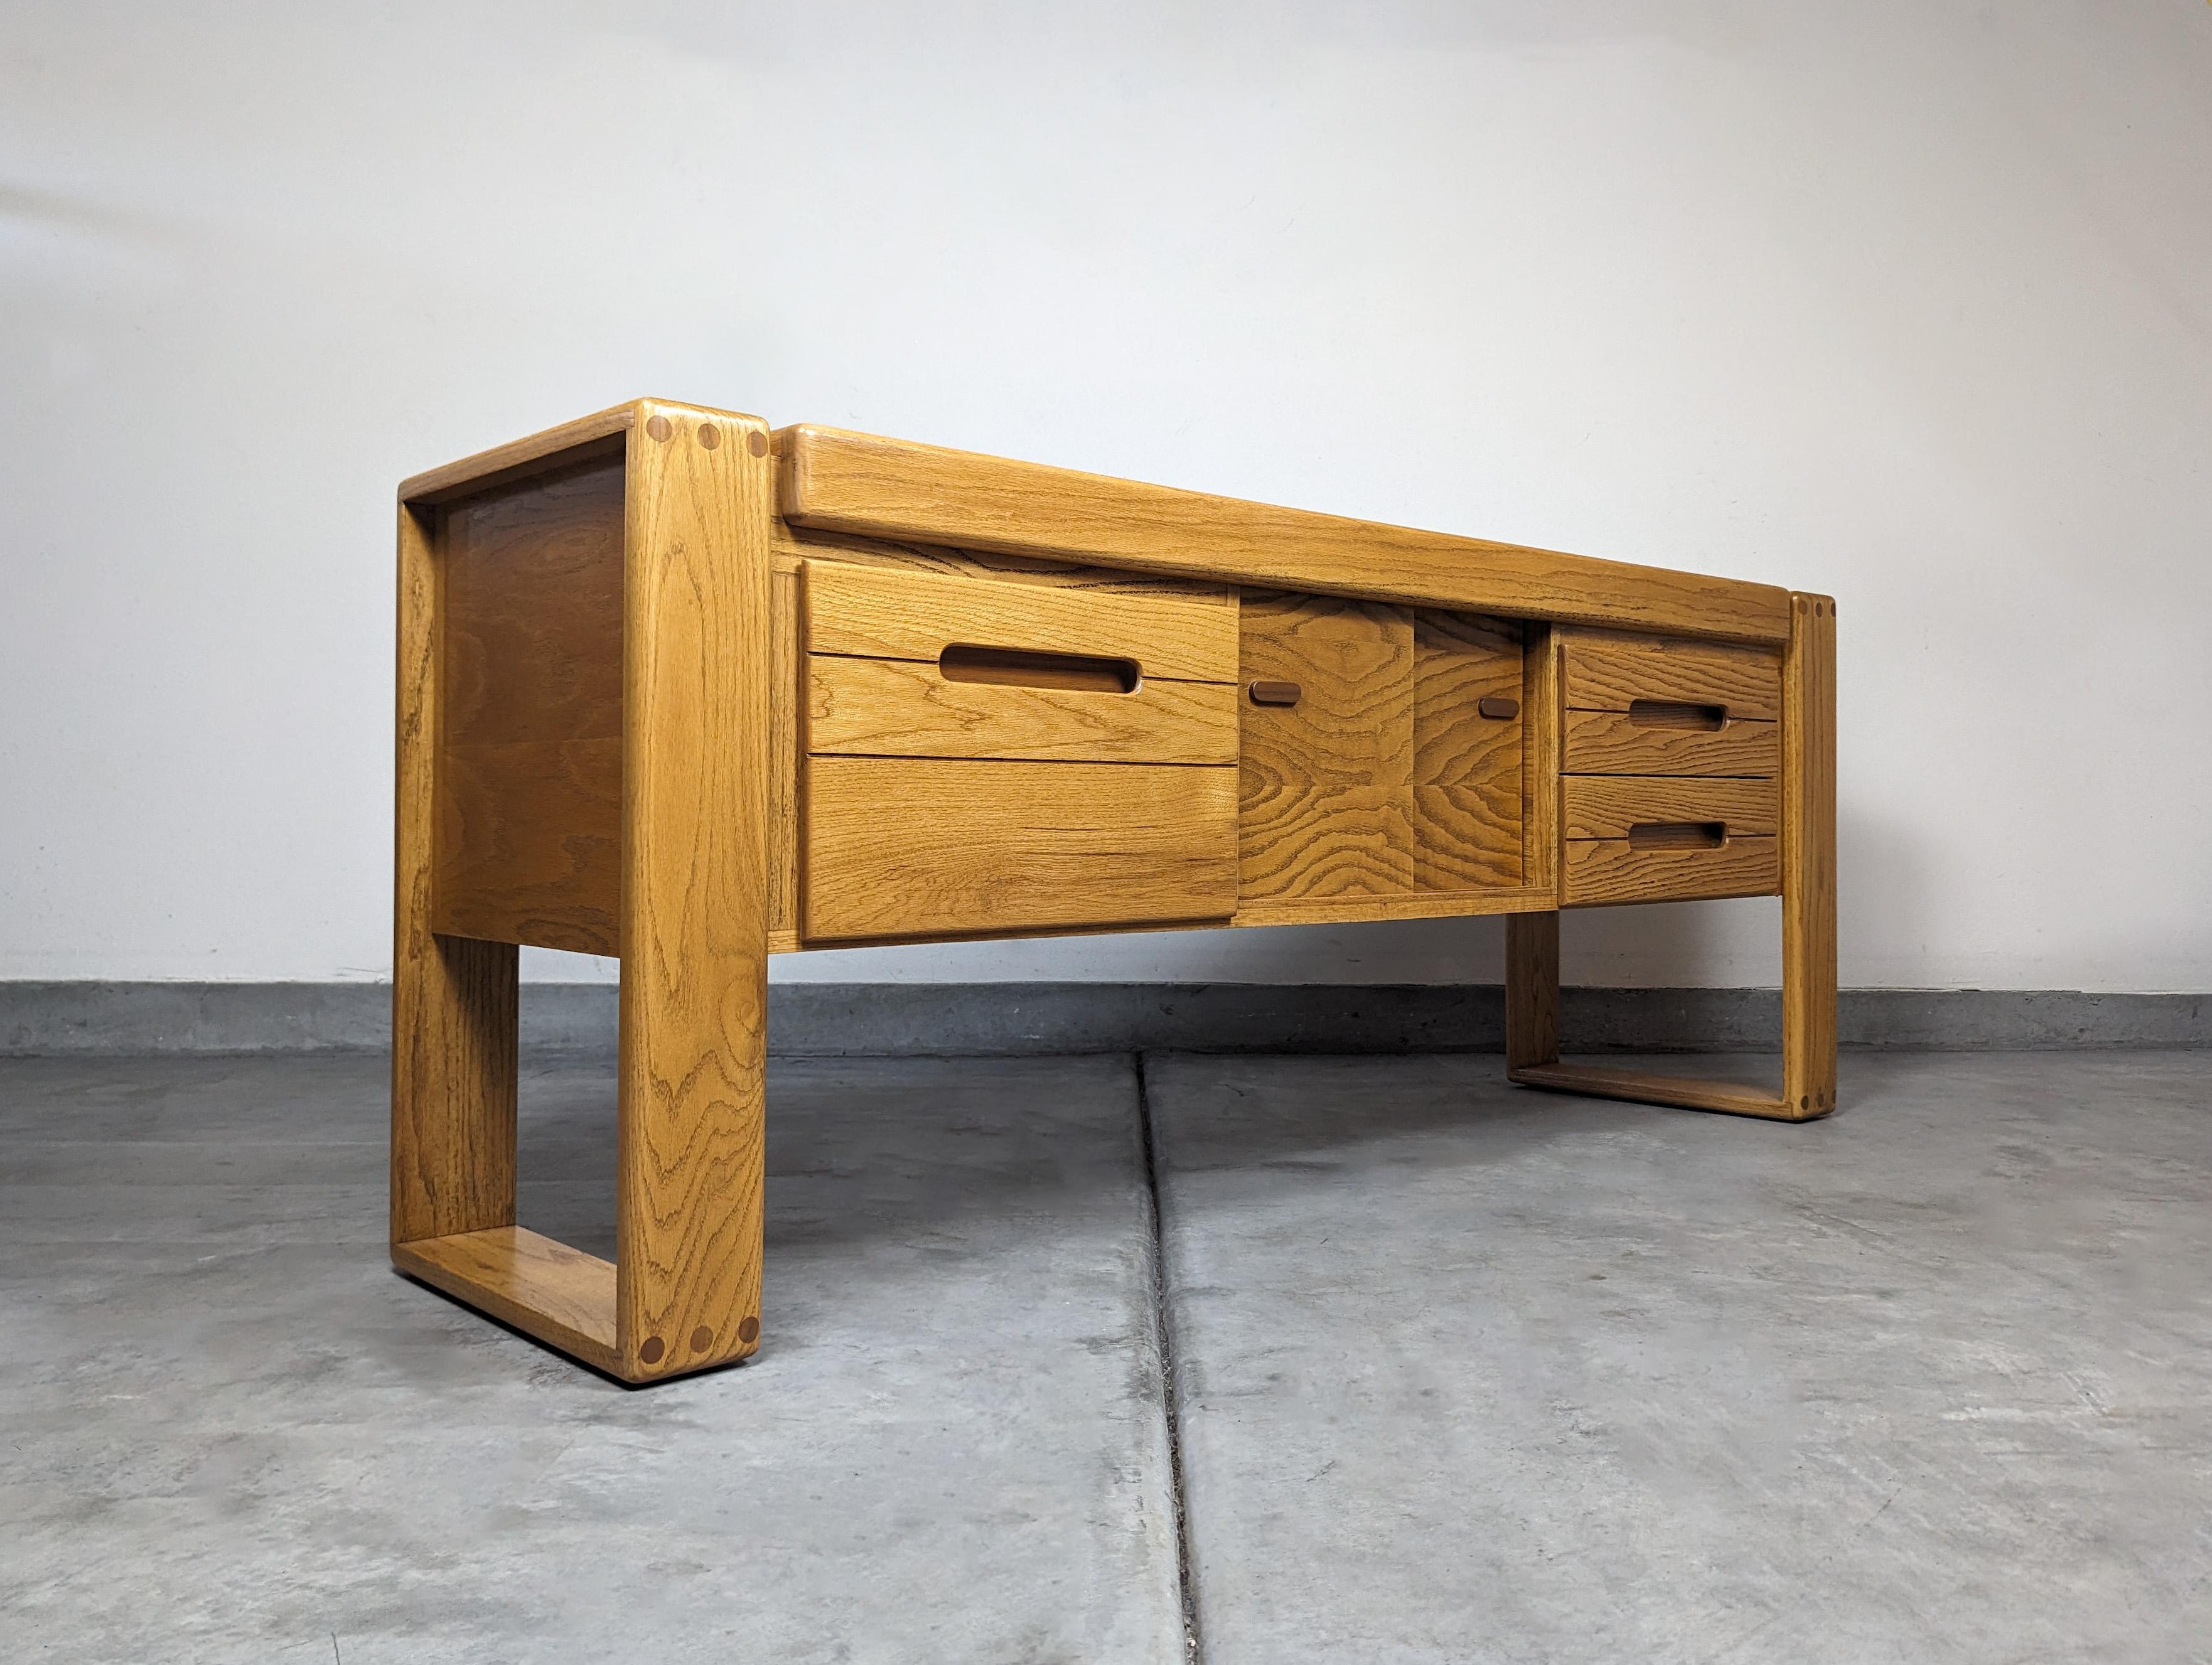 For sale is a meticulously refinished credenza, an authentic piece designed by the renowned Lou Hodges for the California Design Group in the 1980s. This stunning piece is a perfect blend of form and function, making it a timeless addition to any